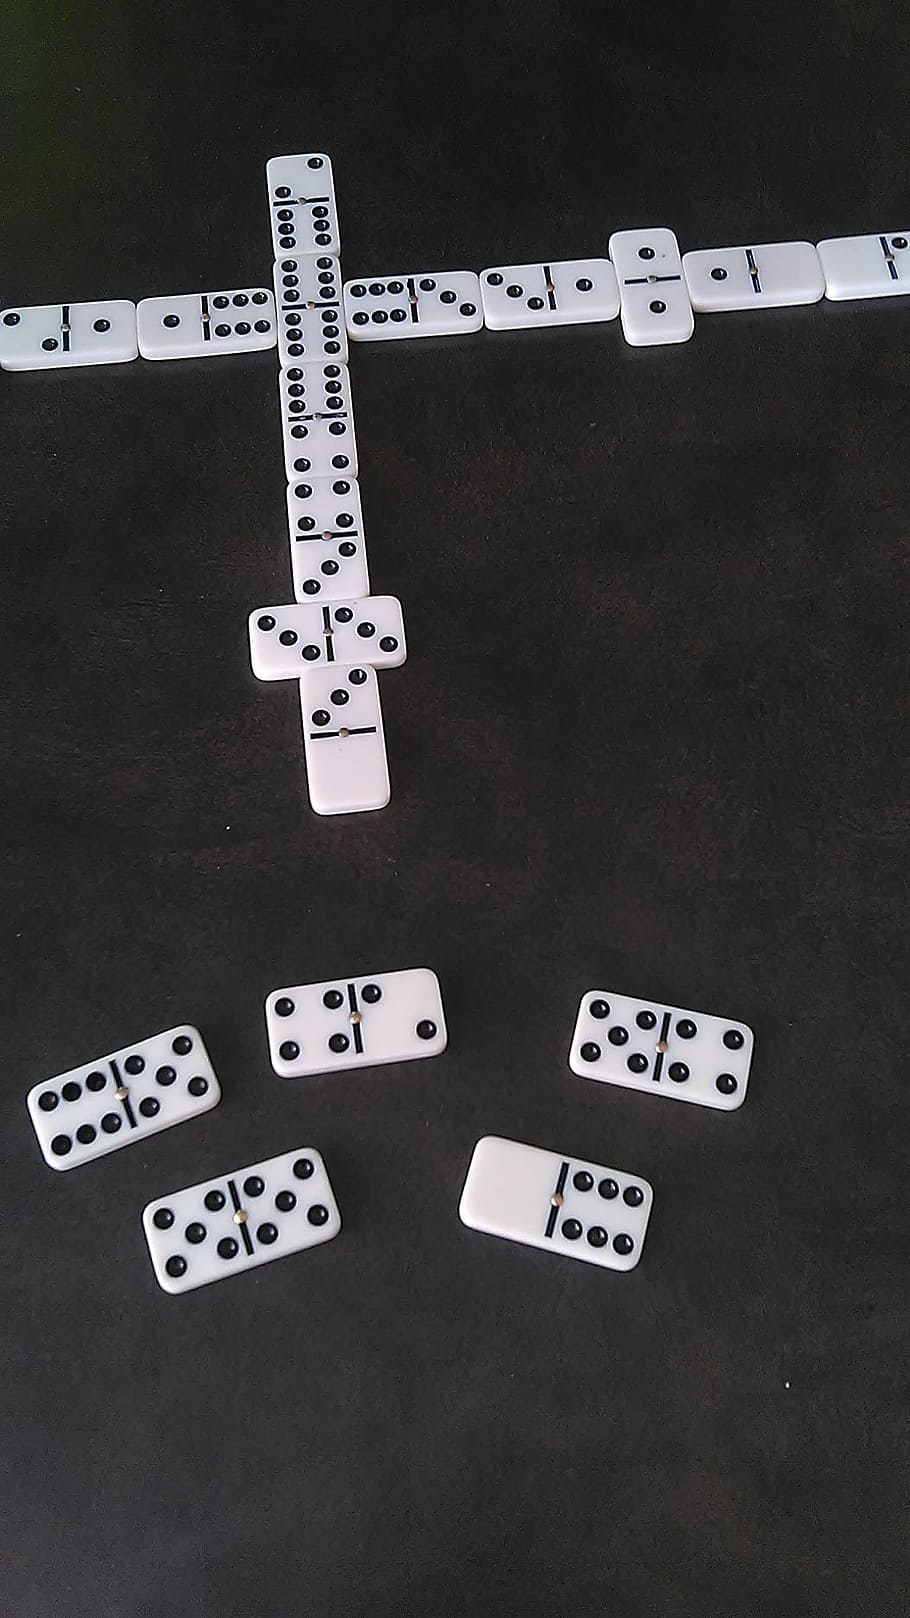 Dominoes, Games, Domino, Pattern, Set, domino, pattern, play, leisure, fun, pieces